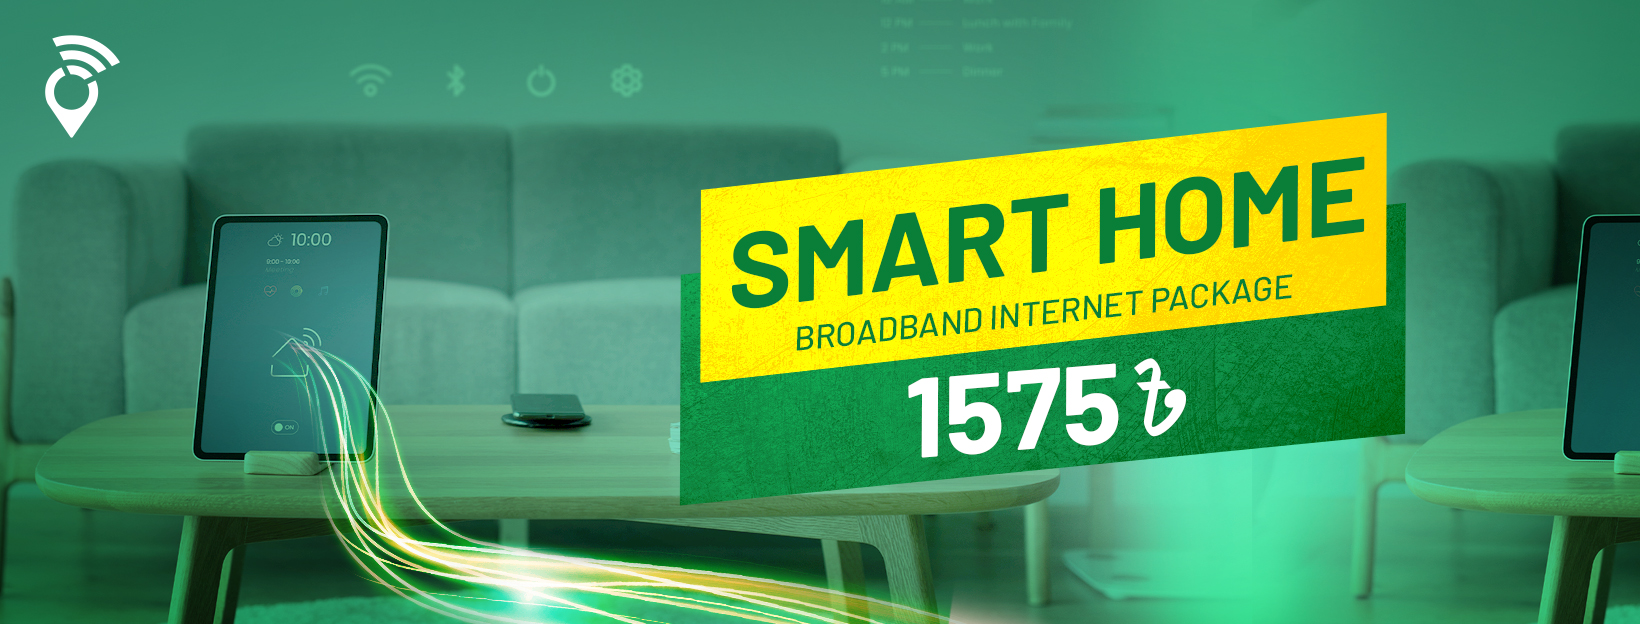 smart home wifi and broadband package